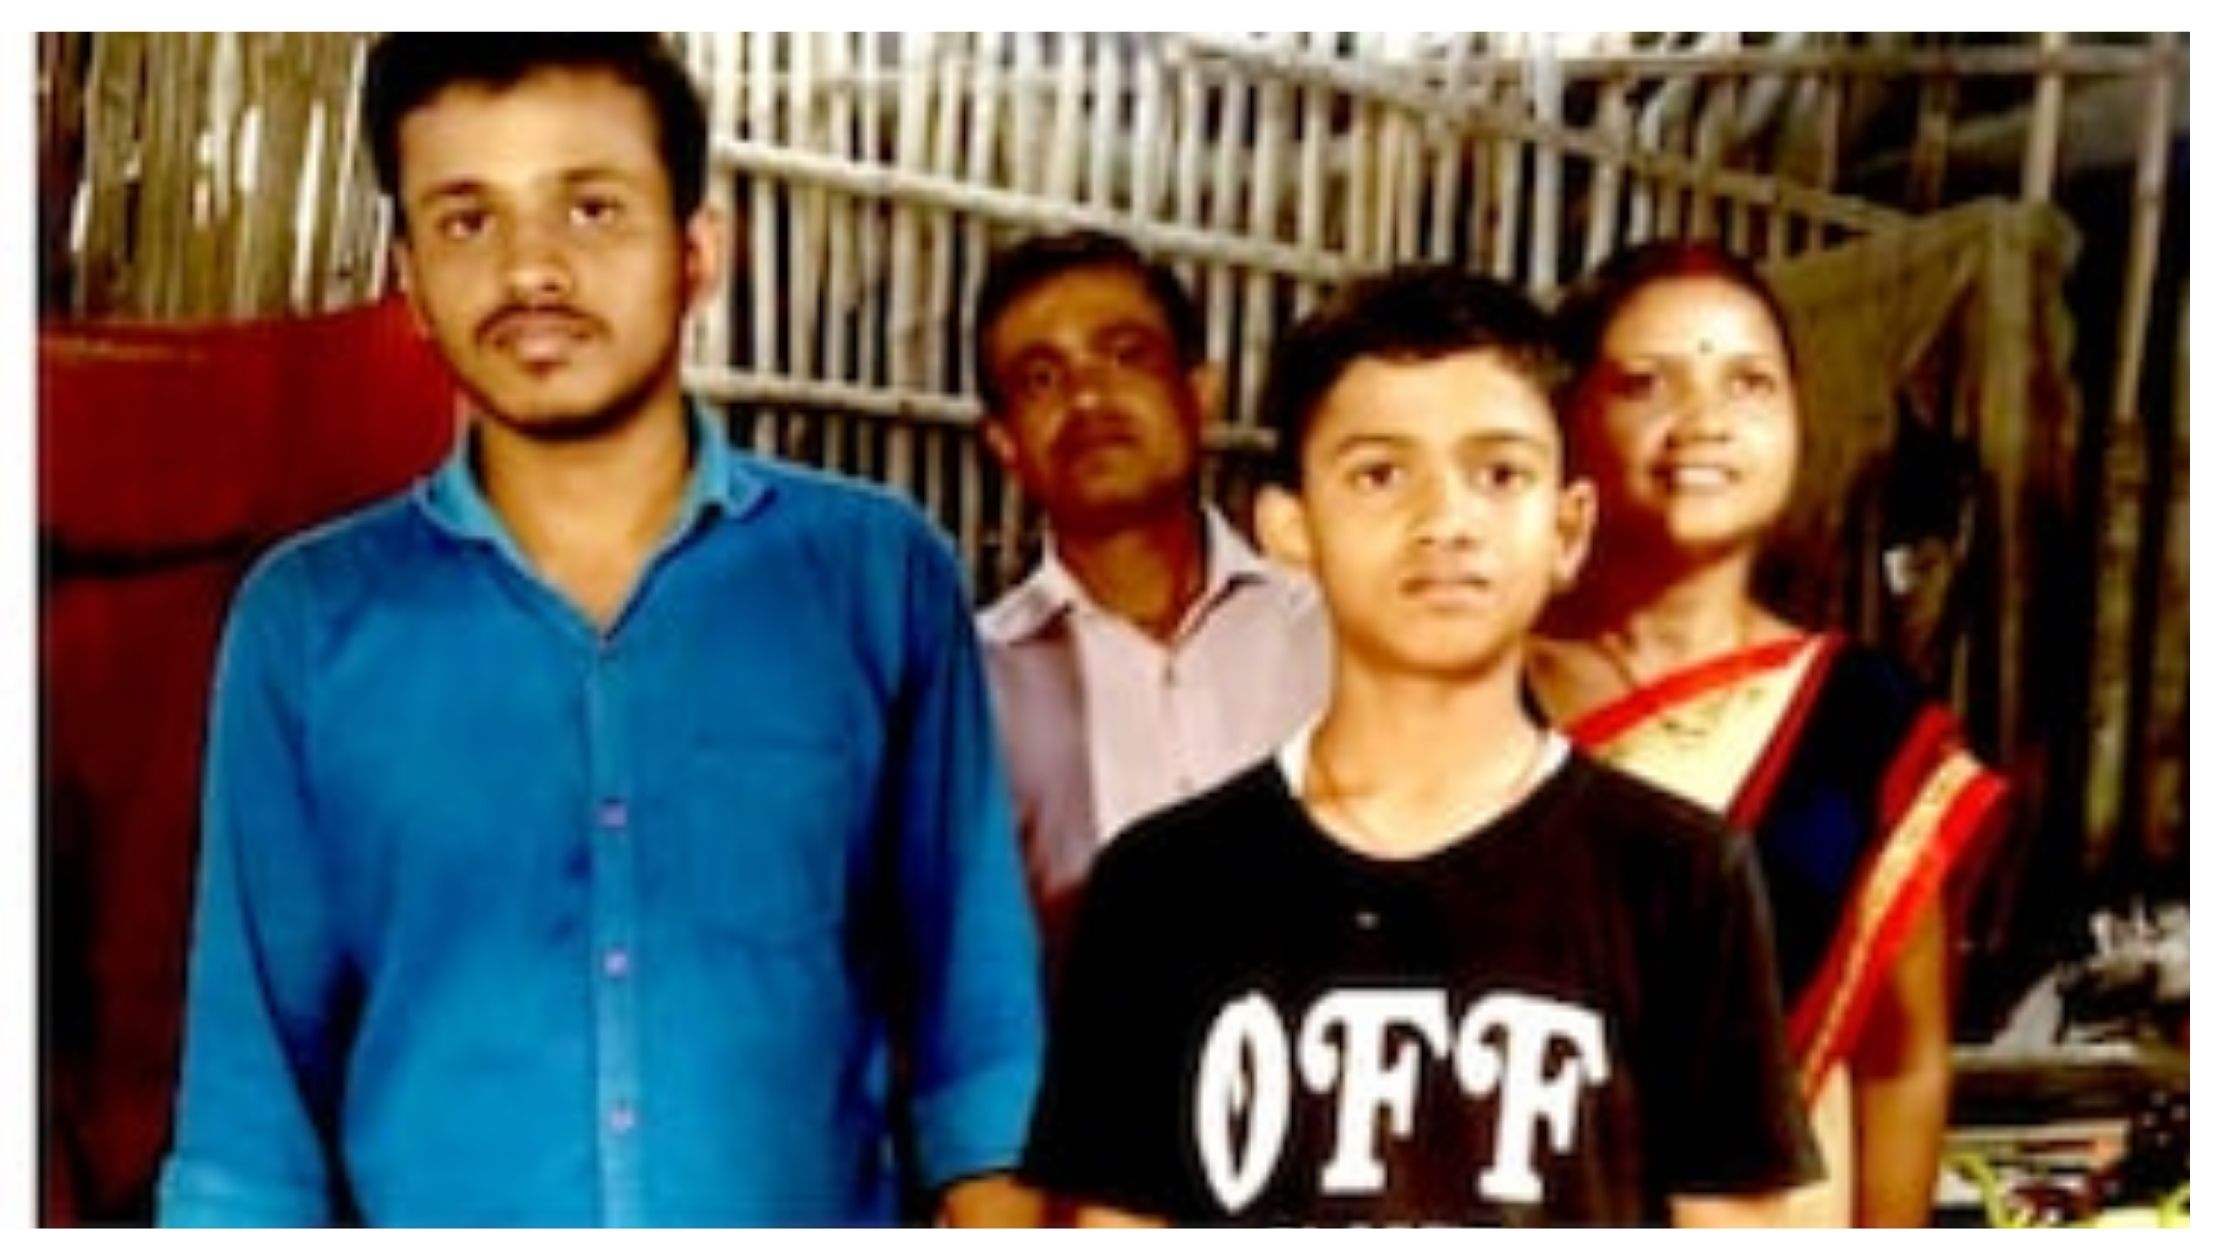 Bihar Board Inter Commerce Topper Ankit with his family